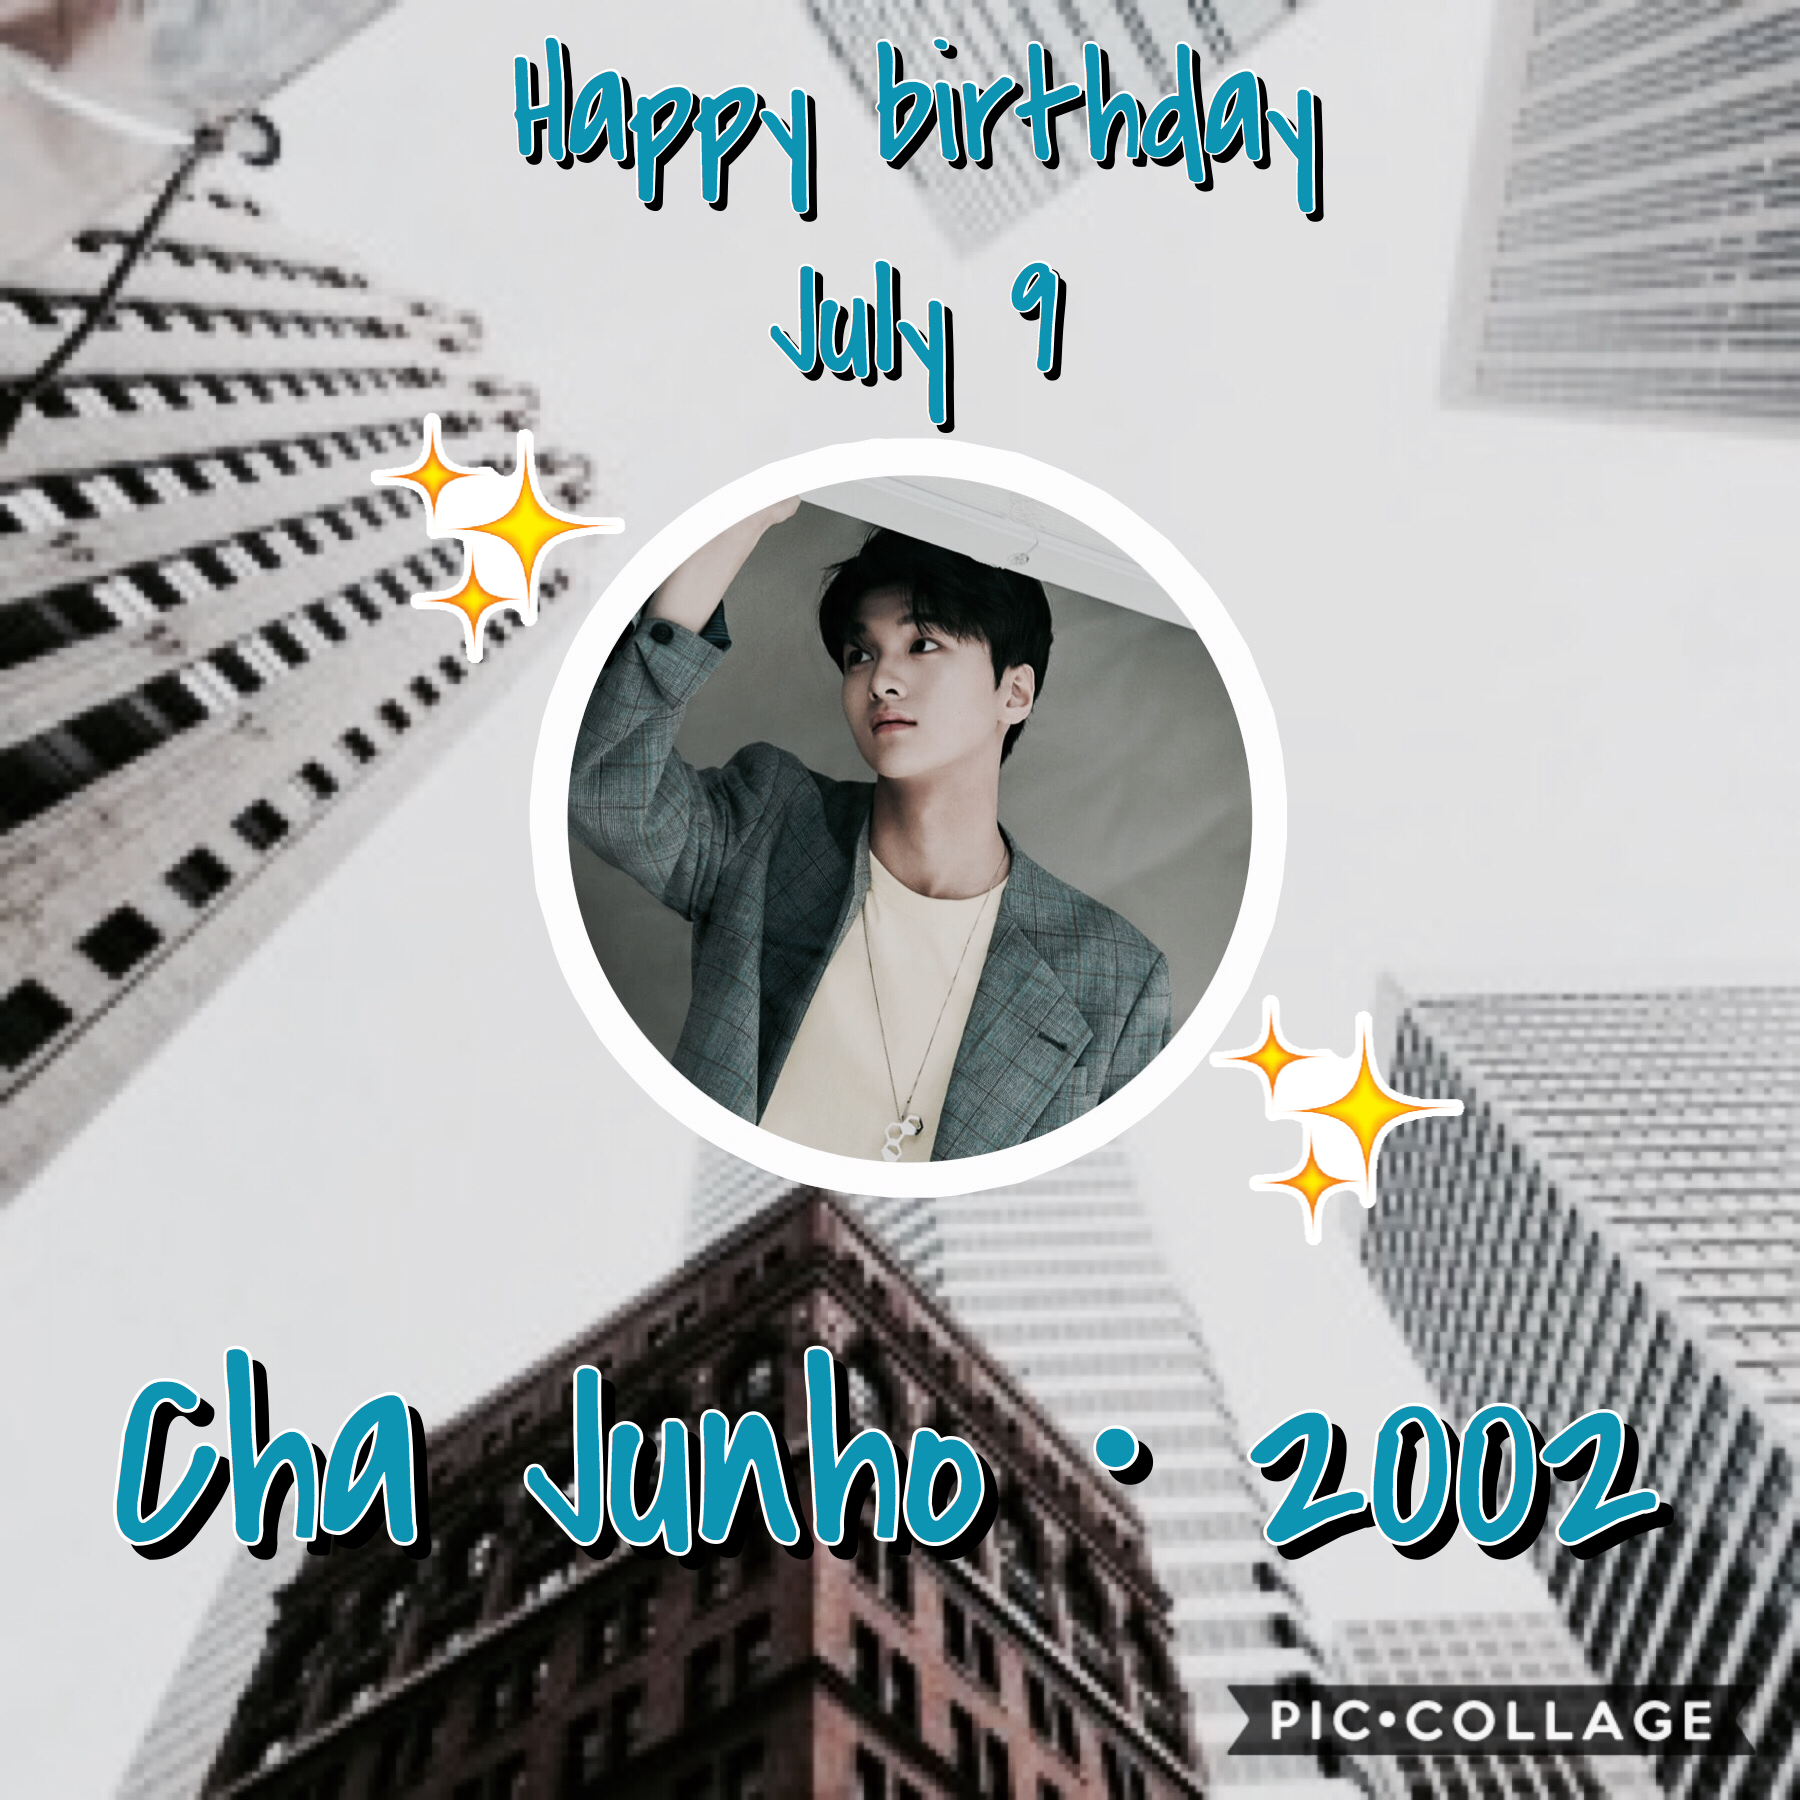 •🌻🍃•
Happy birthday cutie! It’s sad that X1 disbanded but I can’t wait to see Junho perform in his group when he debuts🥺💞
🌻🍃~Whoop~🍃🌻